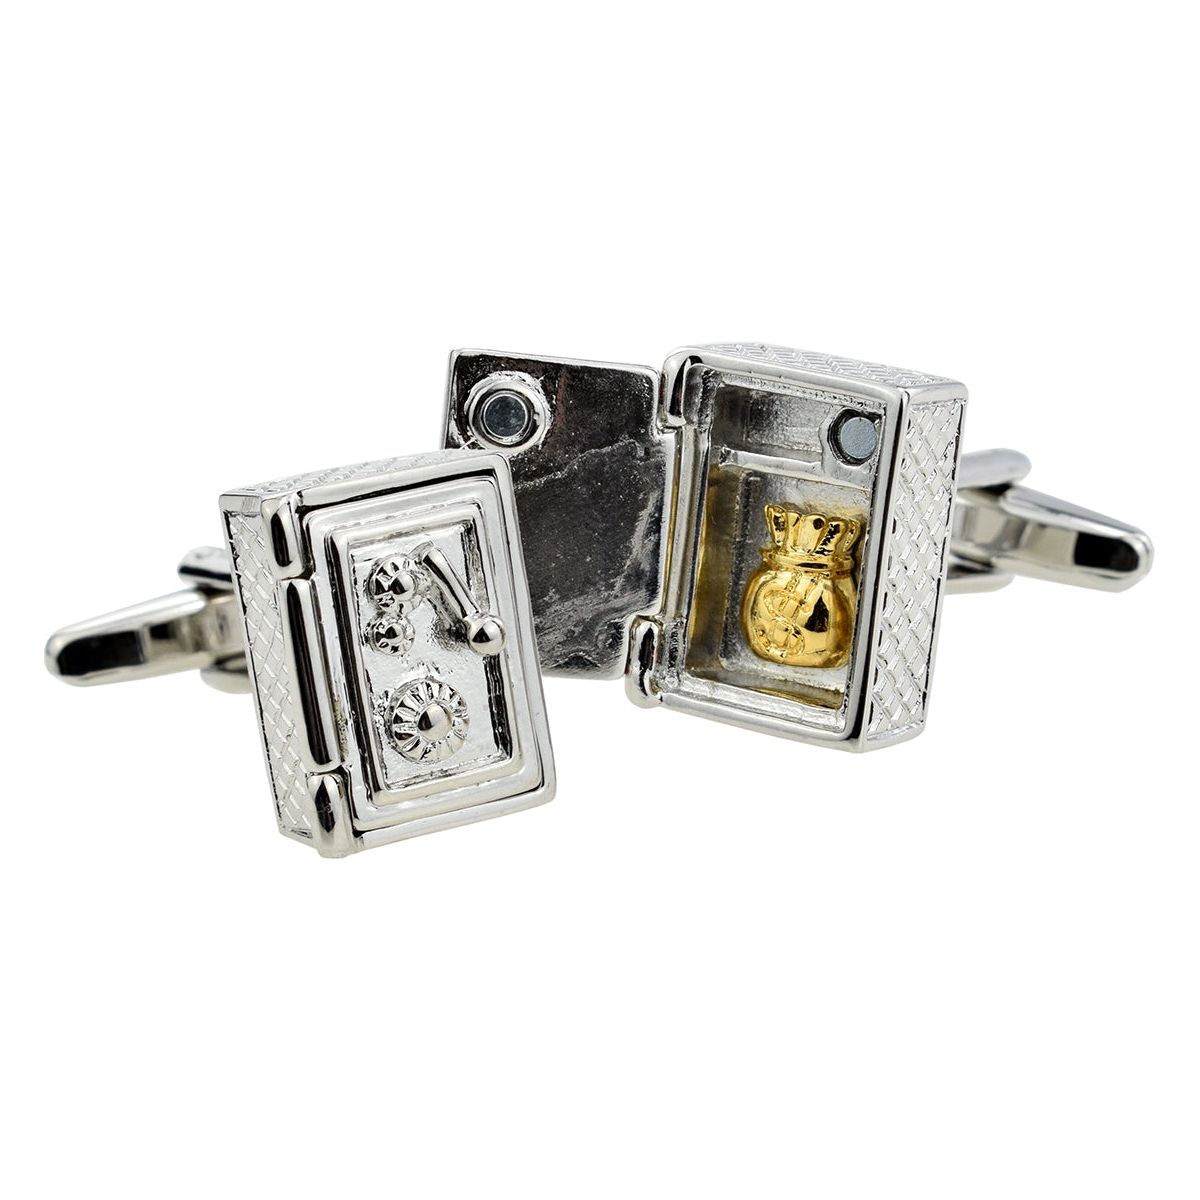 Safe Full of Loot Cufflinks - Ashton and Finch